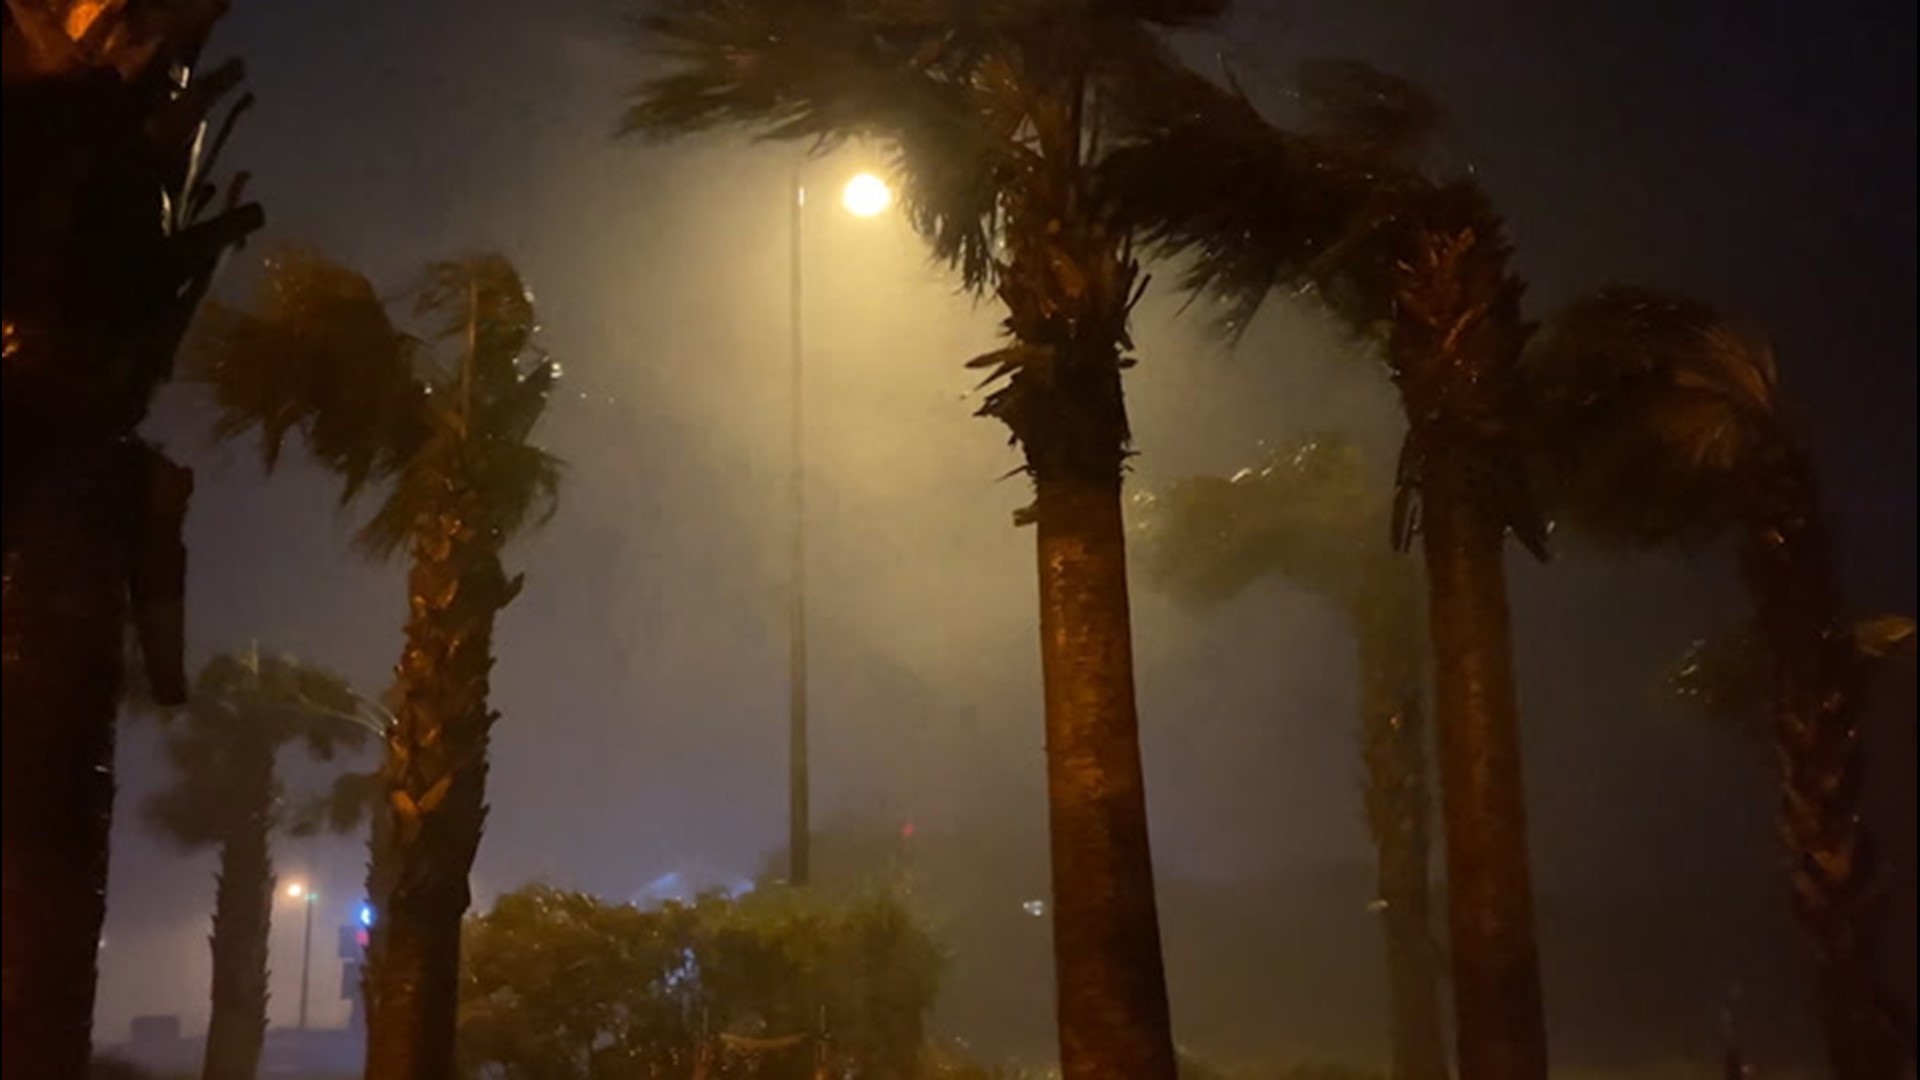 Hurricane Sally's strong winds and heavy rainfall lashed out overnight in Orange Beach, Alabama. The storm made landfall near Gulf Shores, Alabama, on Sept. 16.